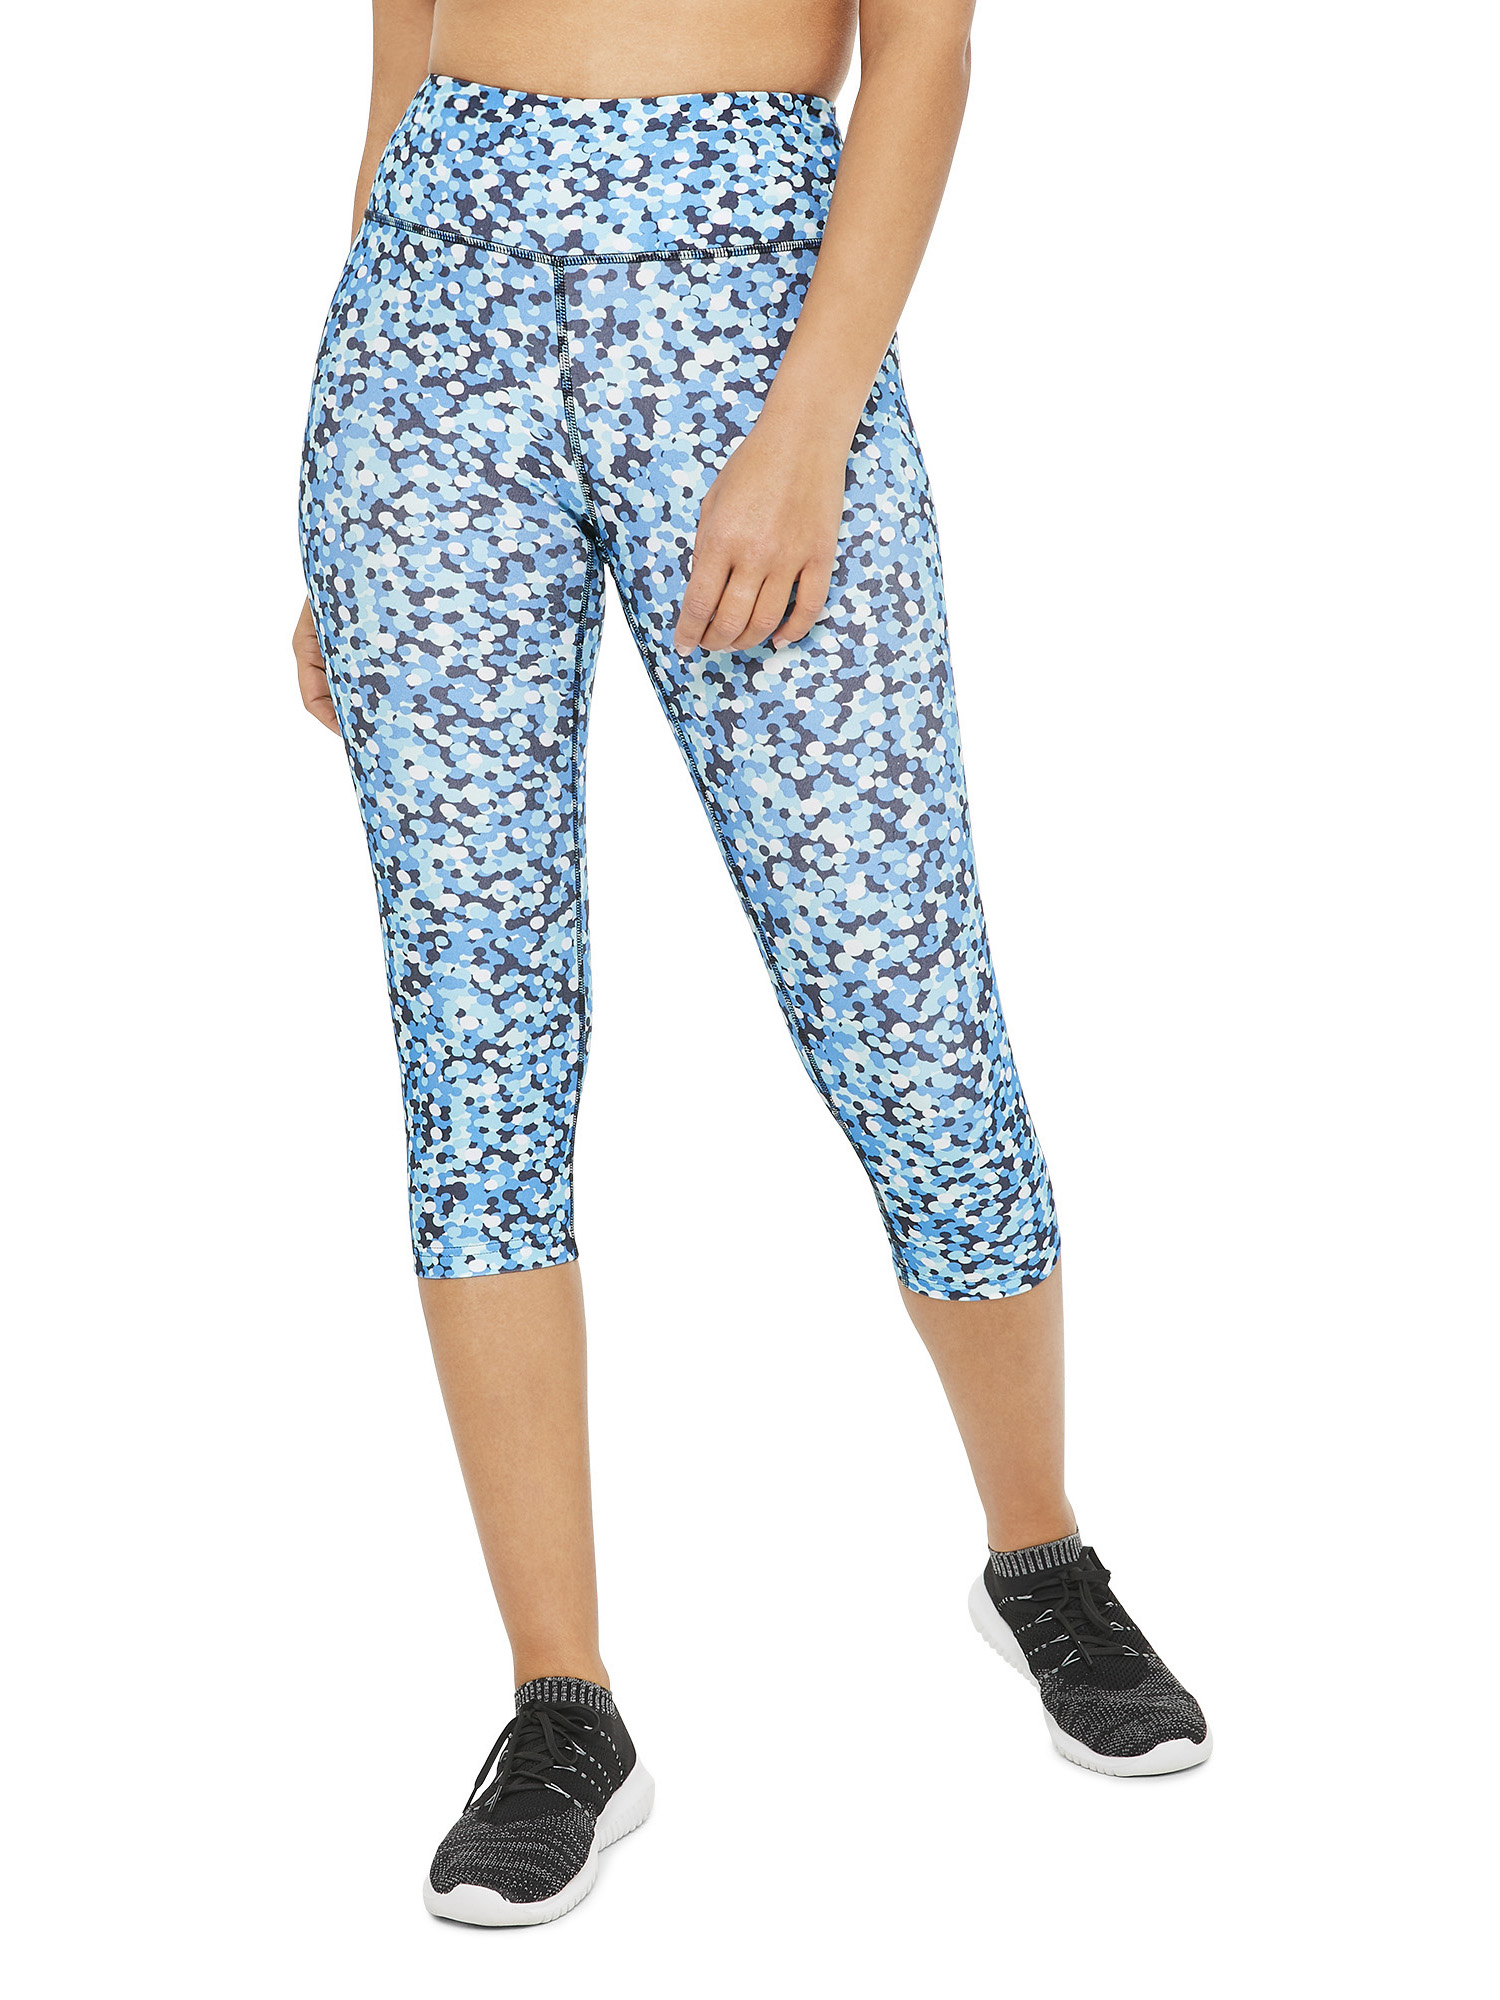 Athletic Works Women's Printed Active Capris 